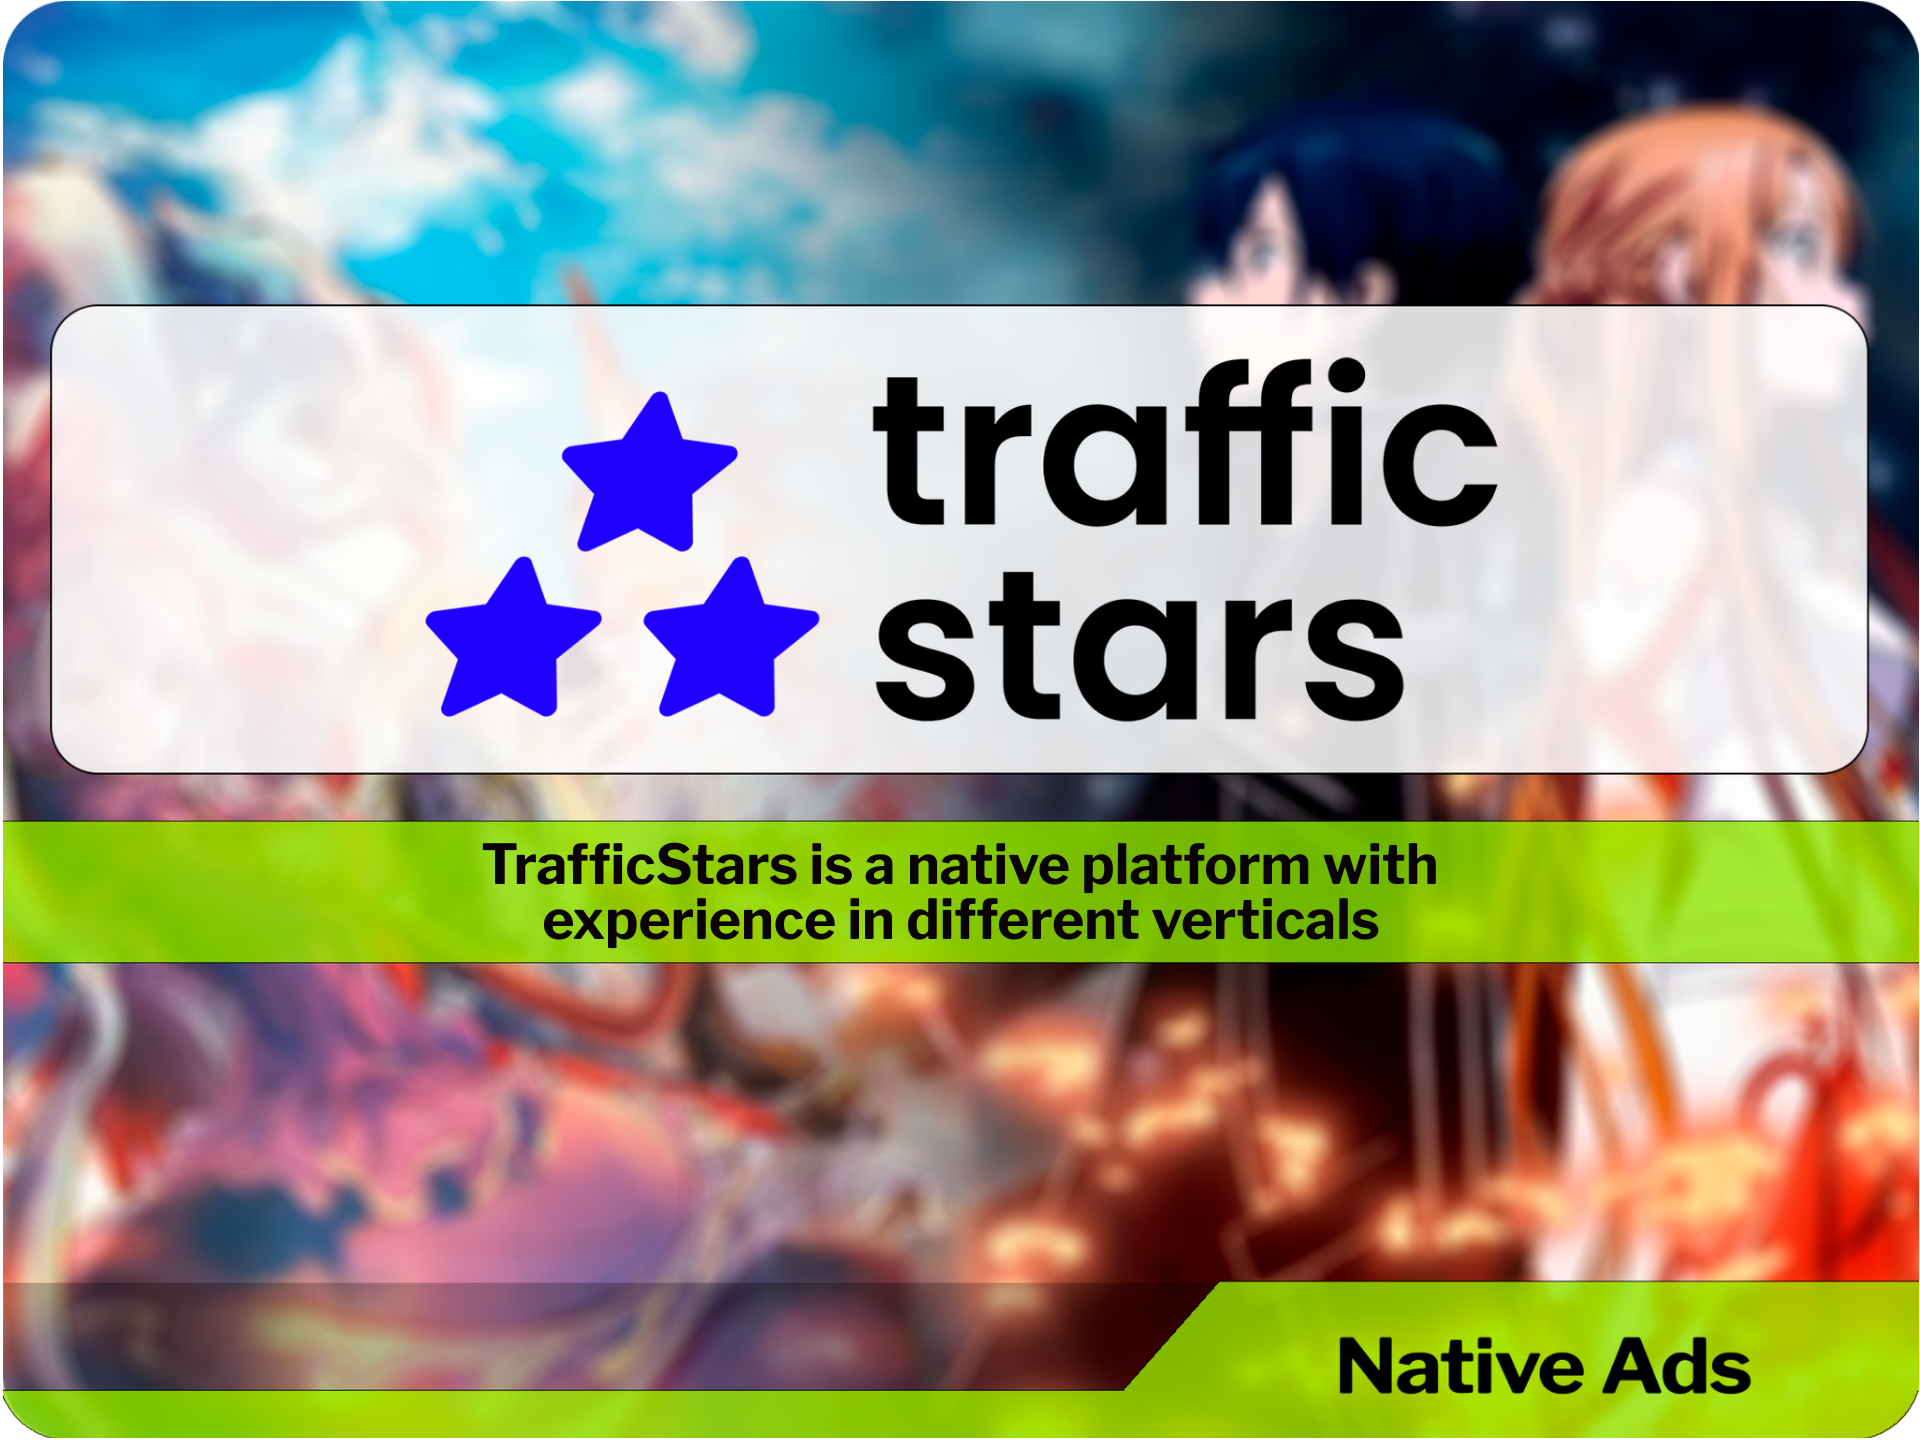 TrafficStars is a native platform with experience in different verticals